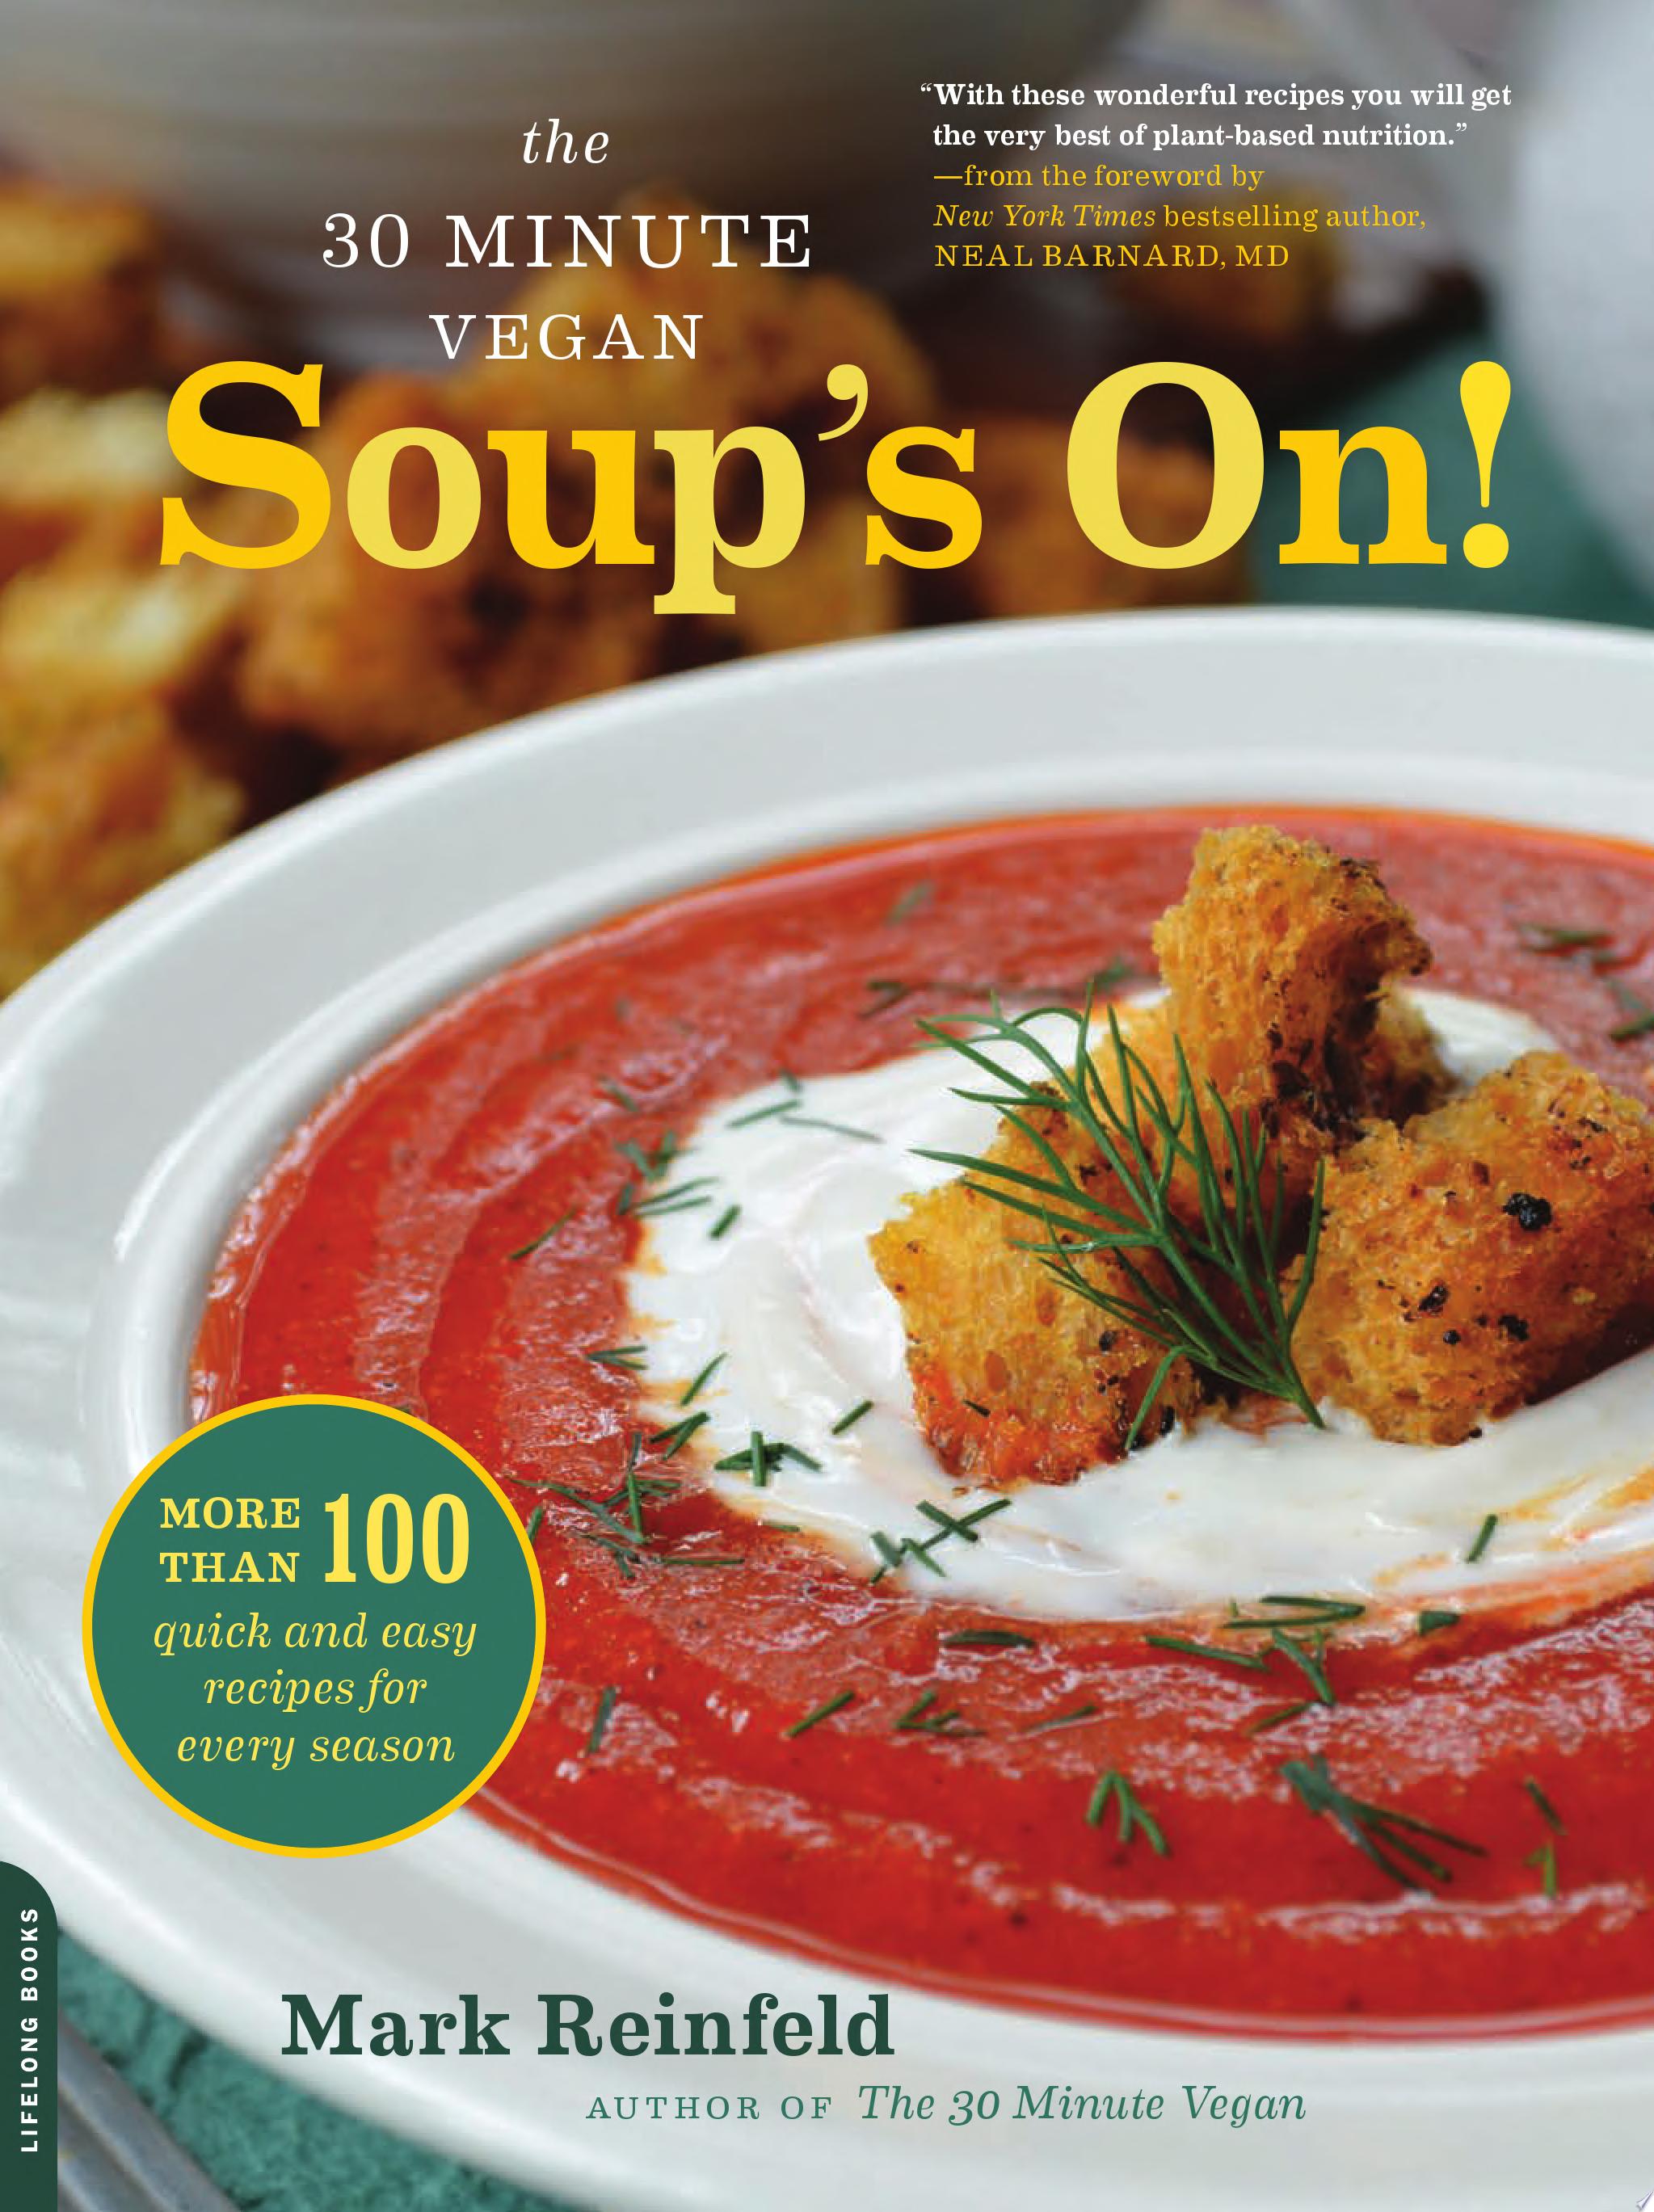 Image for "The 30-Minute Vegan: Soup's On!"